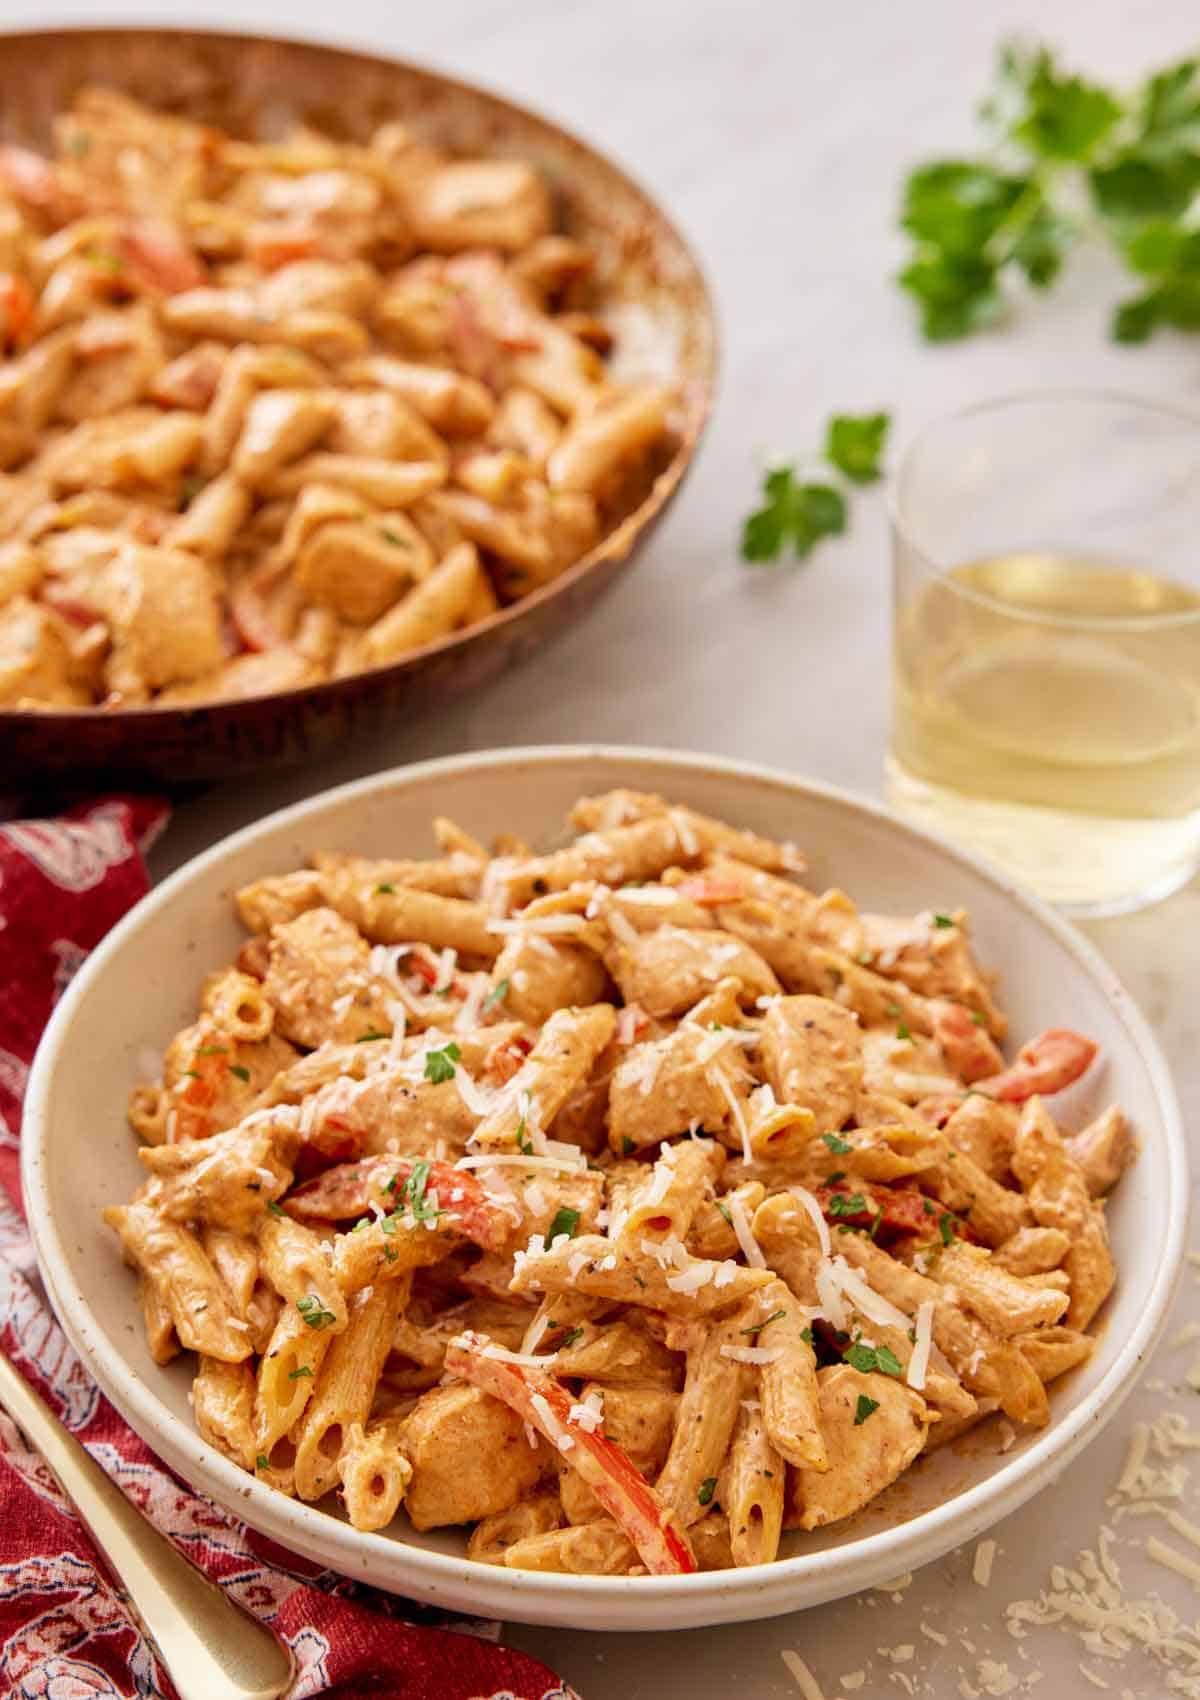 A plate of Cajun chicken pasta with a glass of wine and skillet in the background.